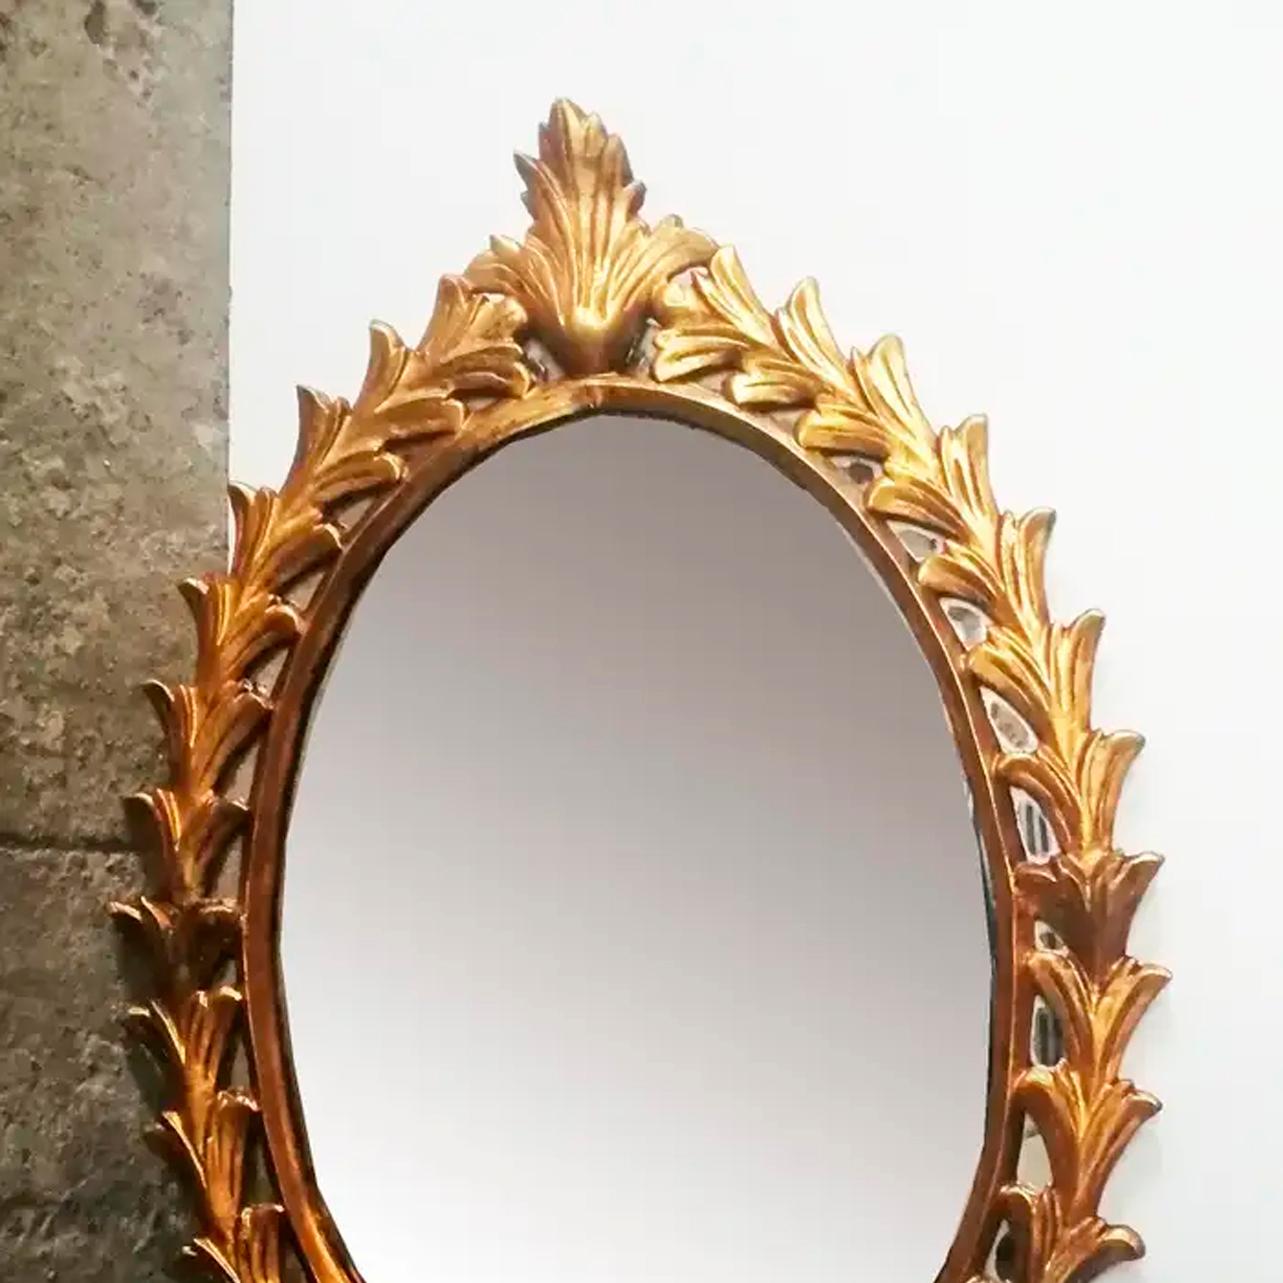 Italian Mirror Large Wooden Acanthus Leaves Glod Leaf Mid-20th Century.  Italy For Sale